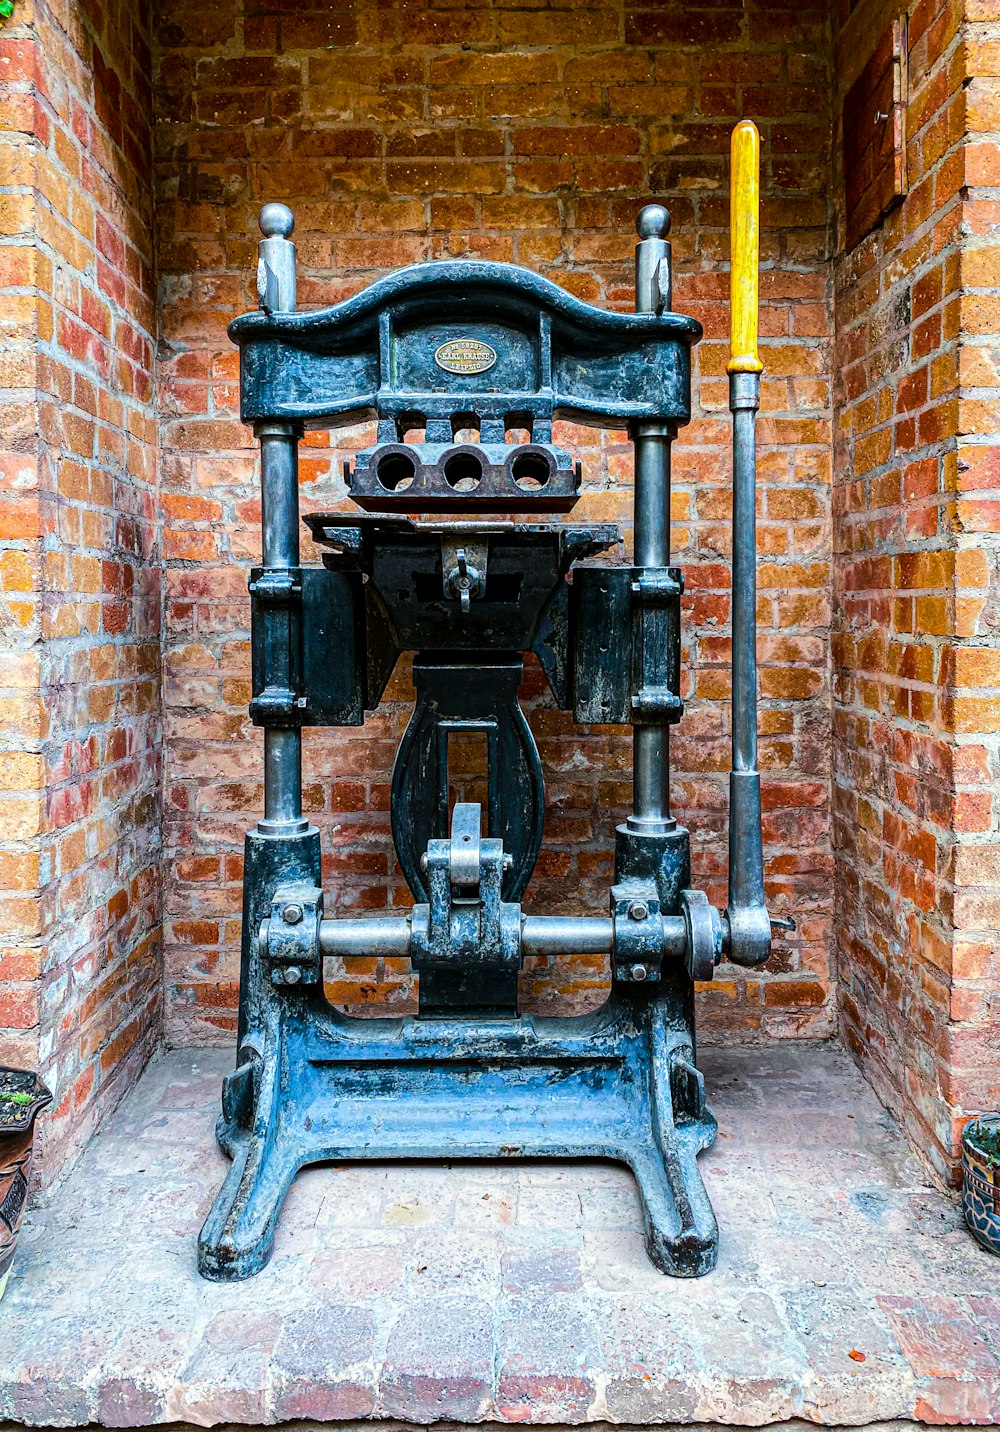 an old fashioned machine sitting in a brick building